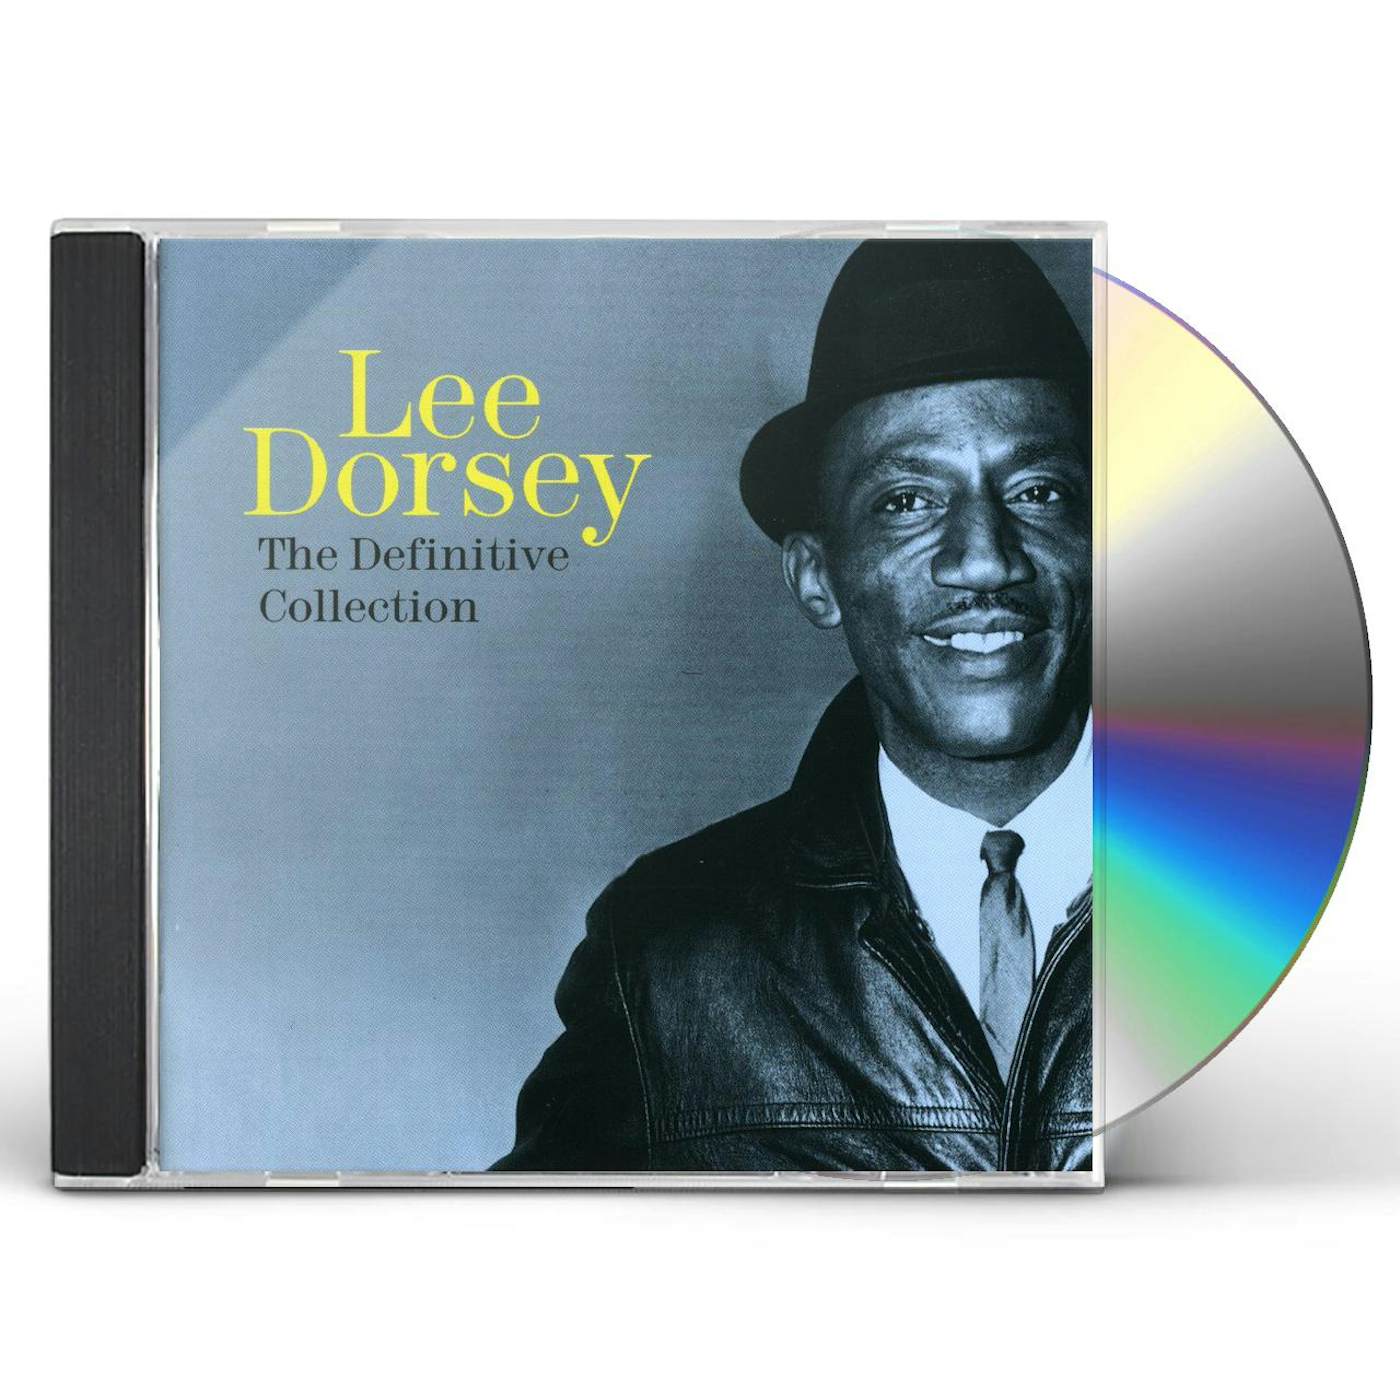 Lee Dorsey DEFINITIVE COLLECTION CD